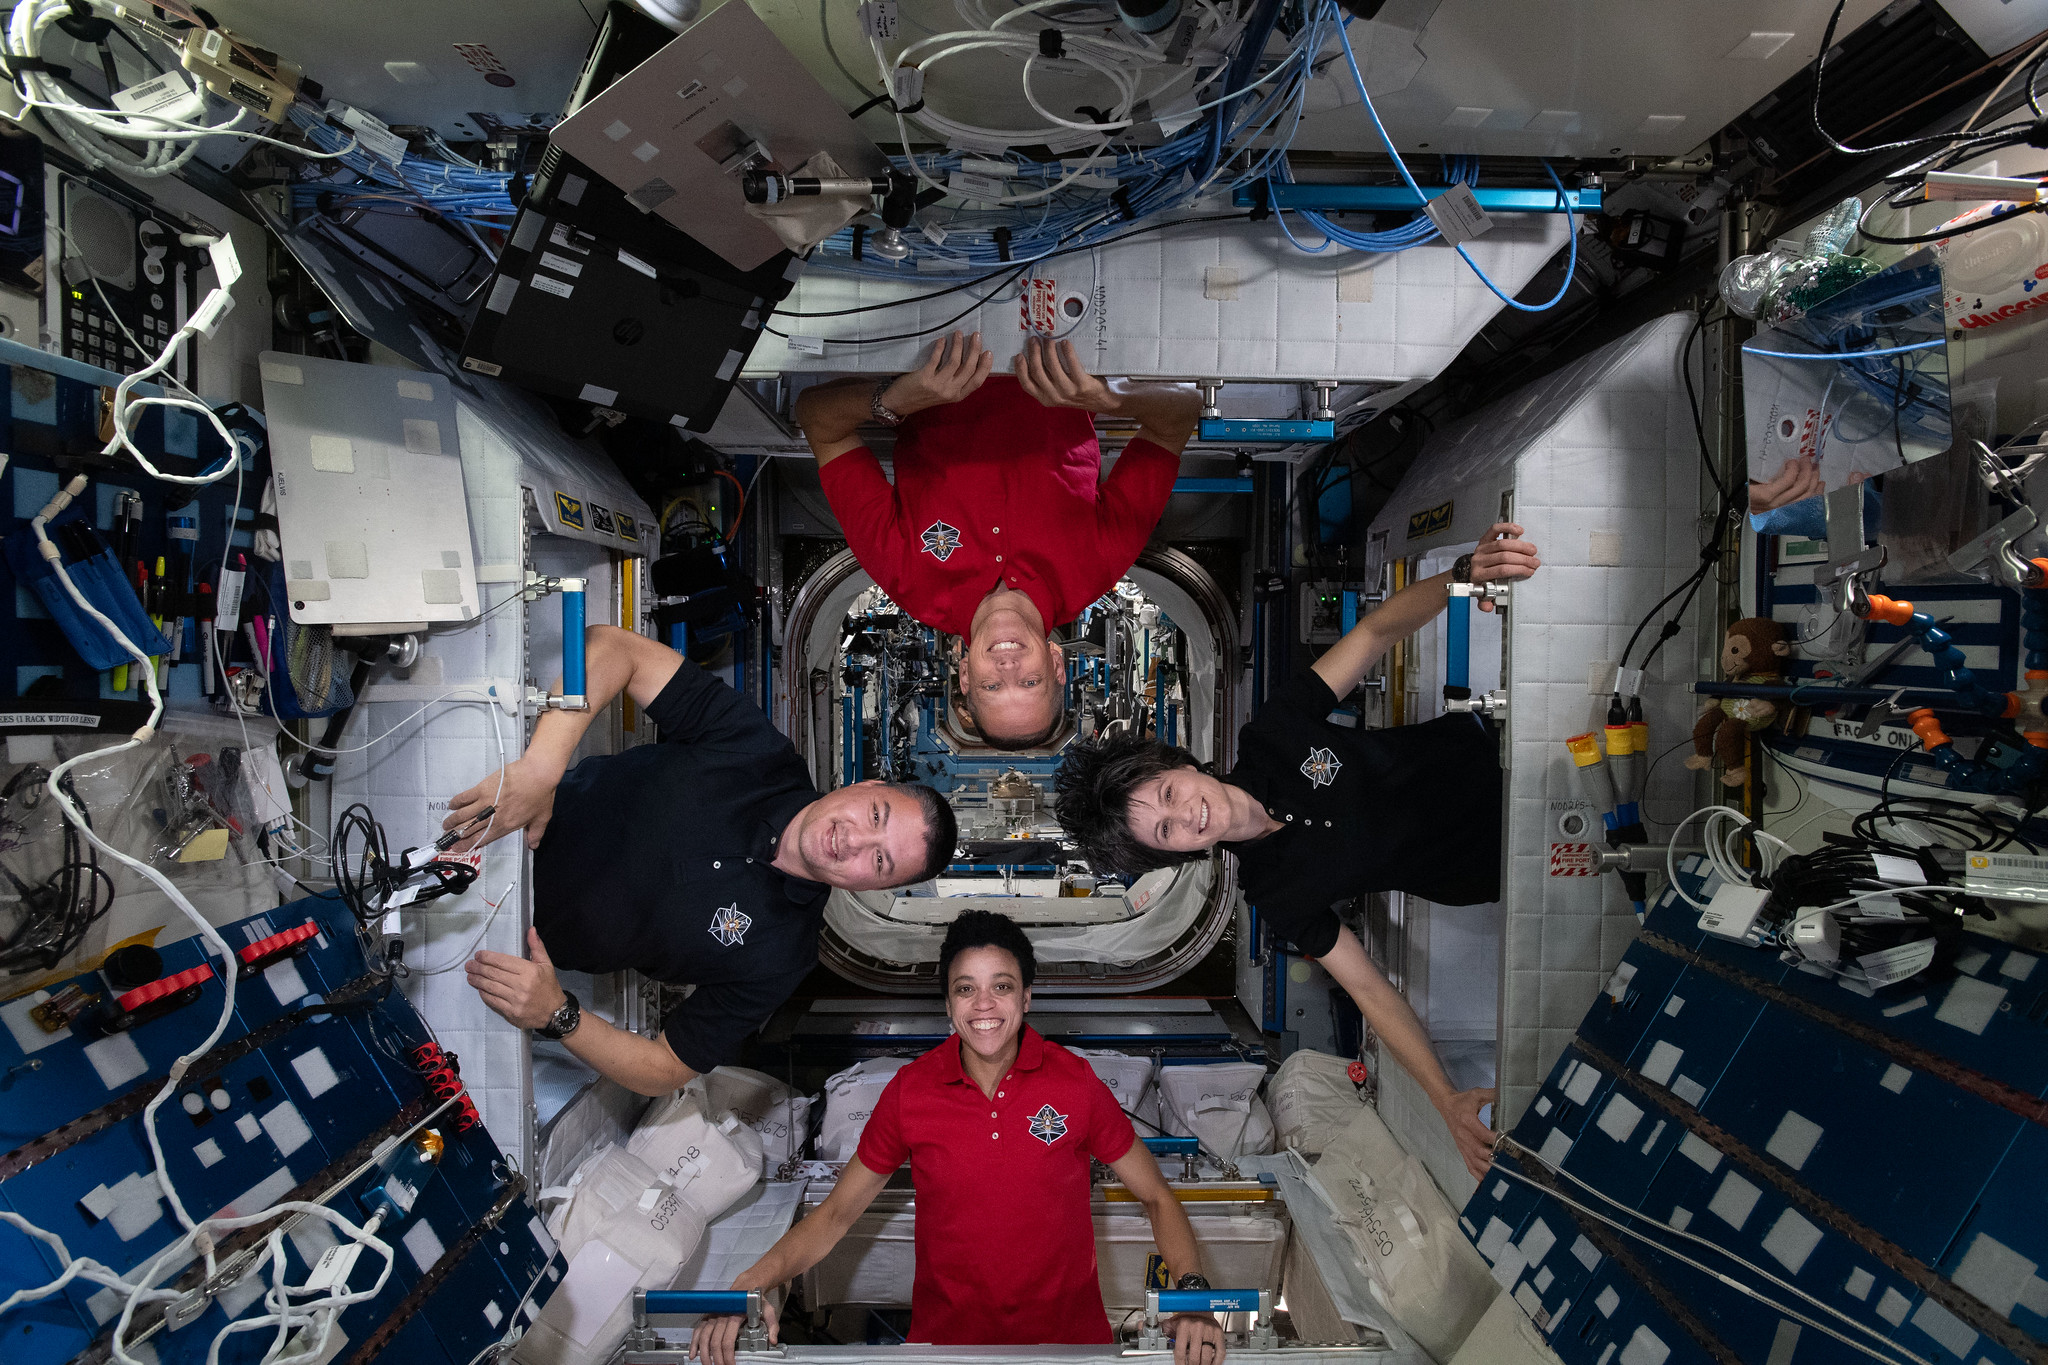 NASA’s SpaceX Crew-4 members (clockwise from bottom) Jessica Watkins, Kjell Lindgren, and Bob Hines, all from NASA, and Samantha Cristoforetti of ESA (European Space Agency), pose aboard the International Space Station.